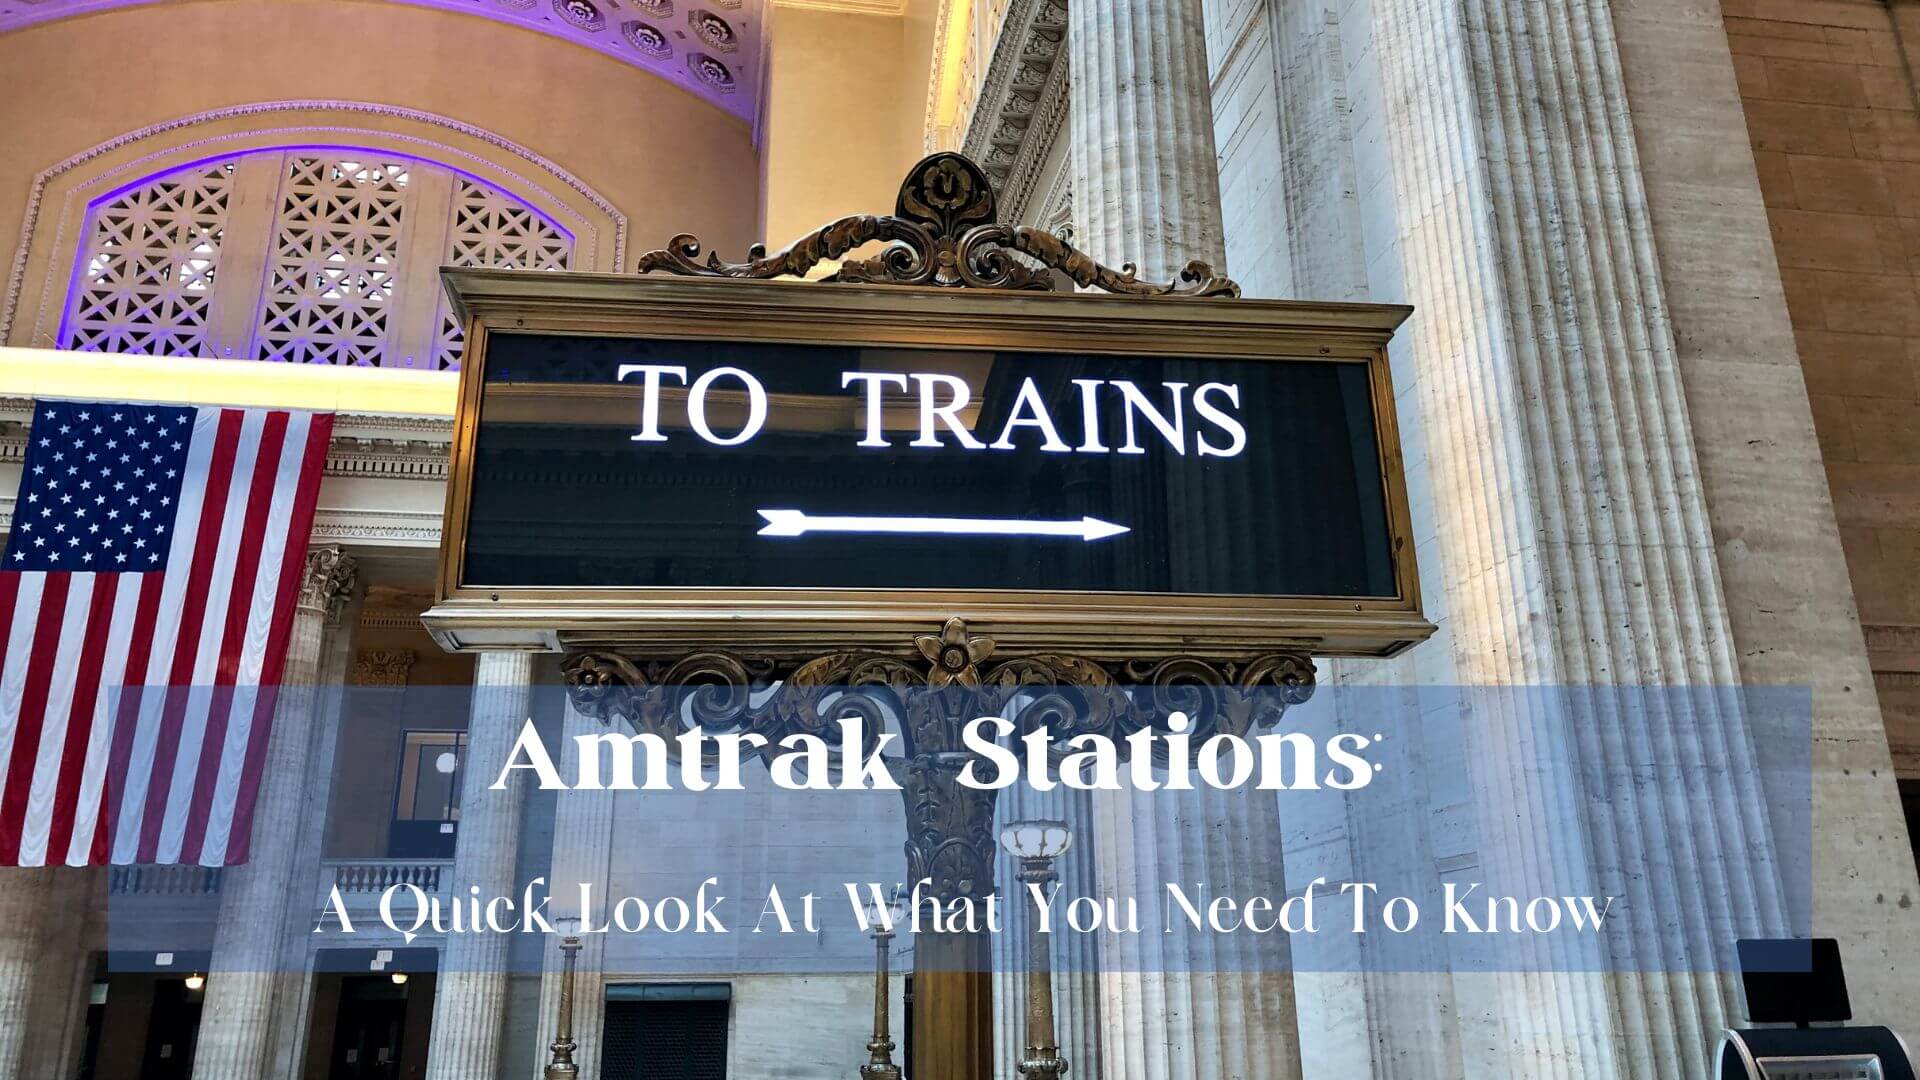 Amtrak Stations overview